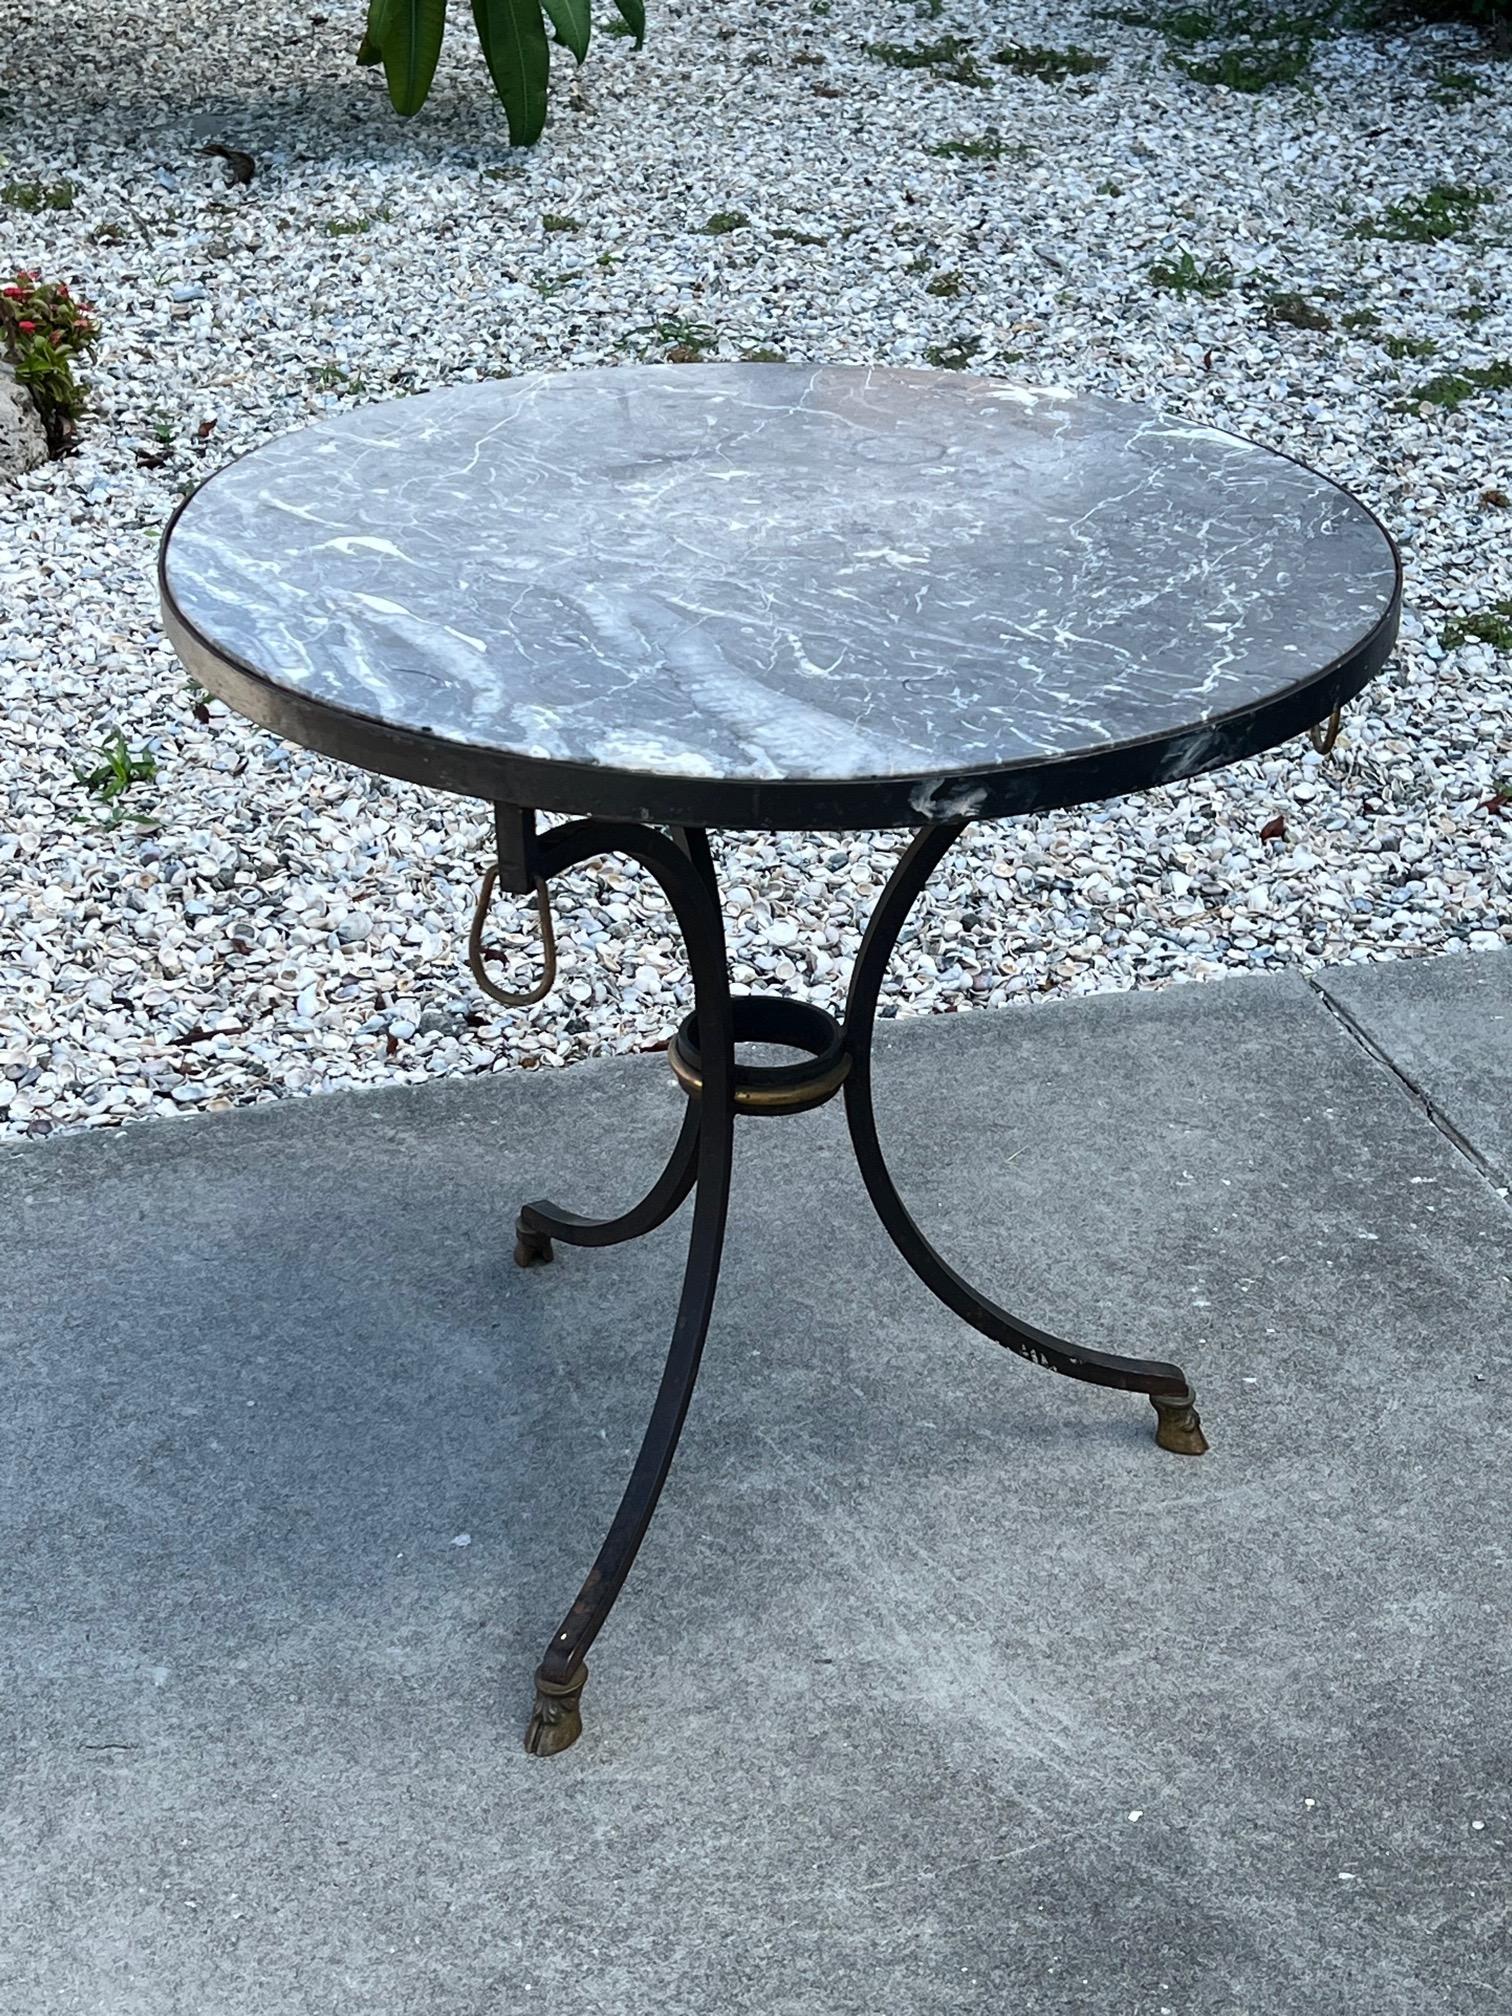 Stone A Classic Wrought Iron Gueridon By Yale Burge ca' 1950's For Sale